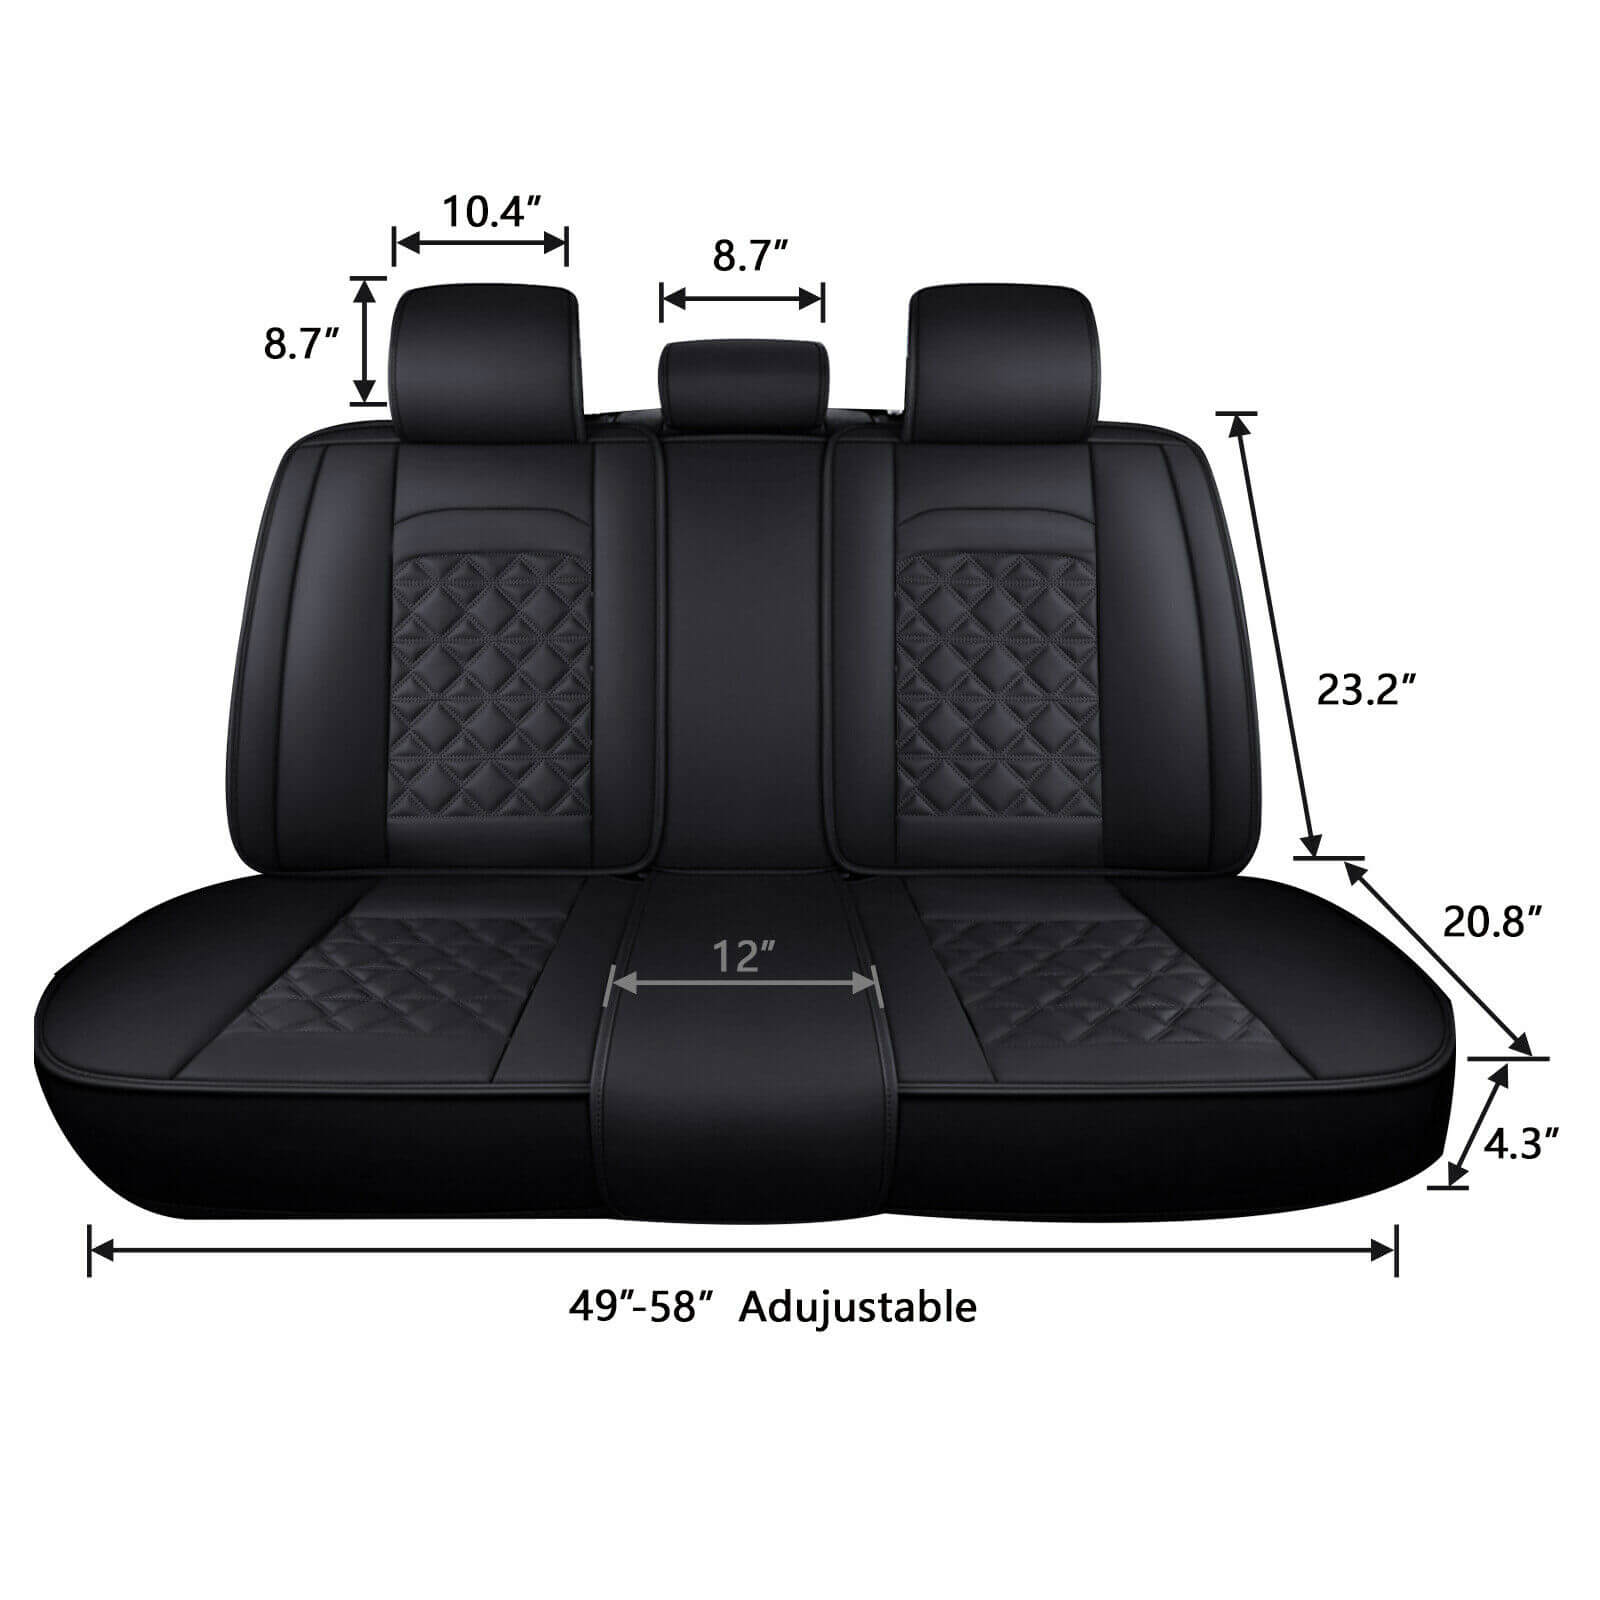 Rear Seat Size of Universal Full Surrounded Leather Car Seat Covers